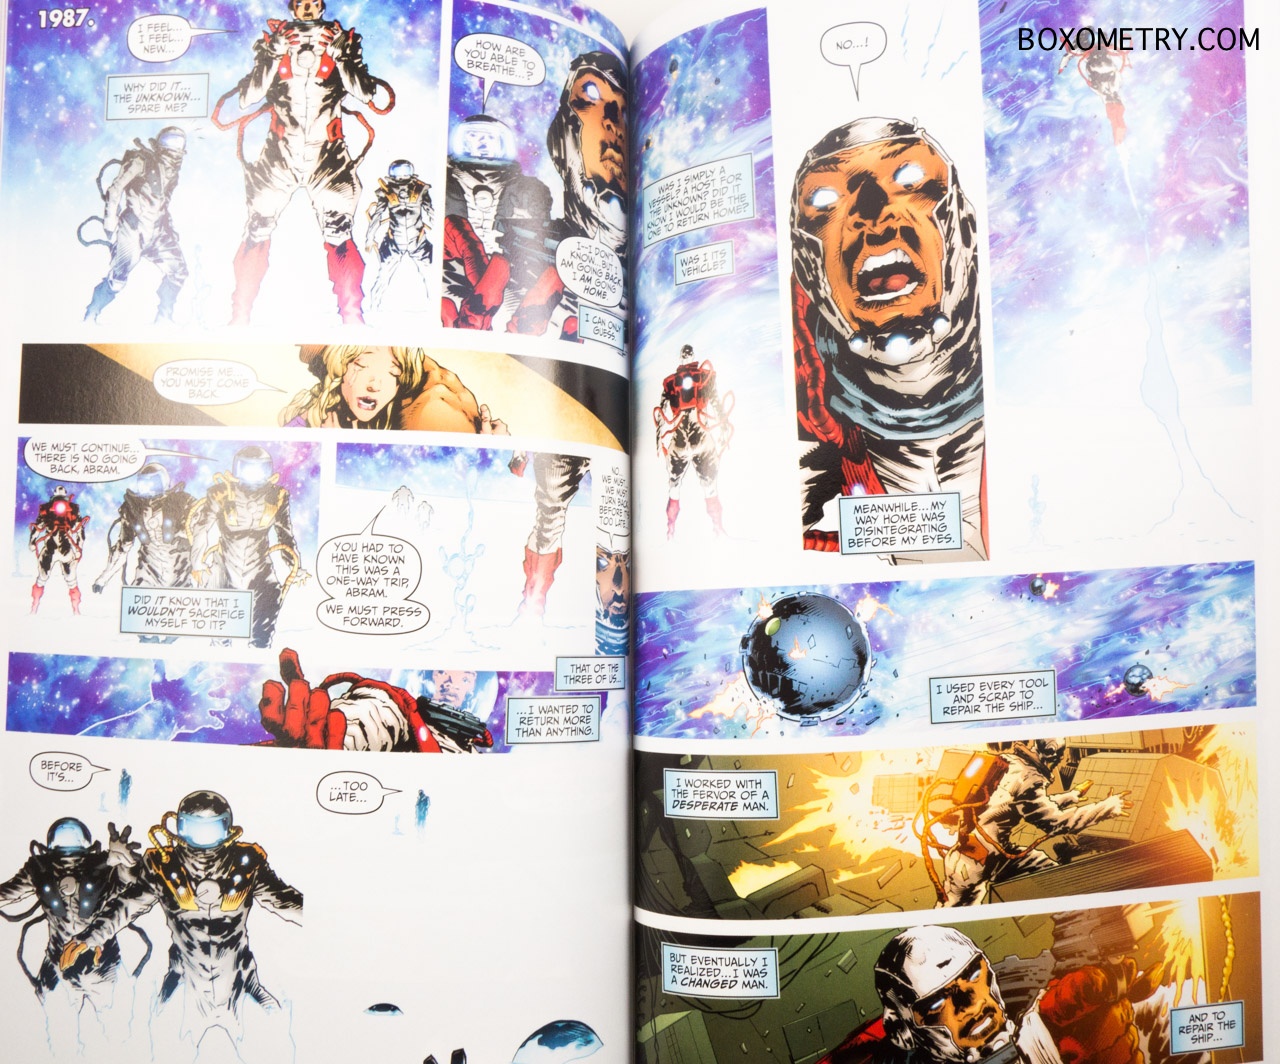 Boxometry Comic Bento July 2015 Review - Divinity TP Inside